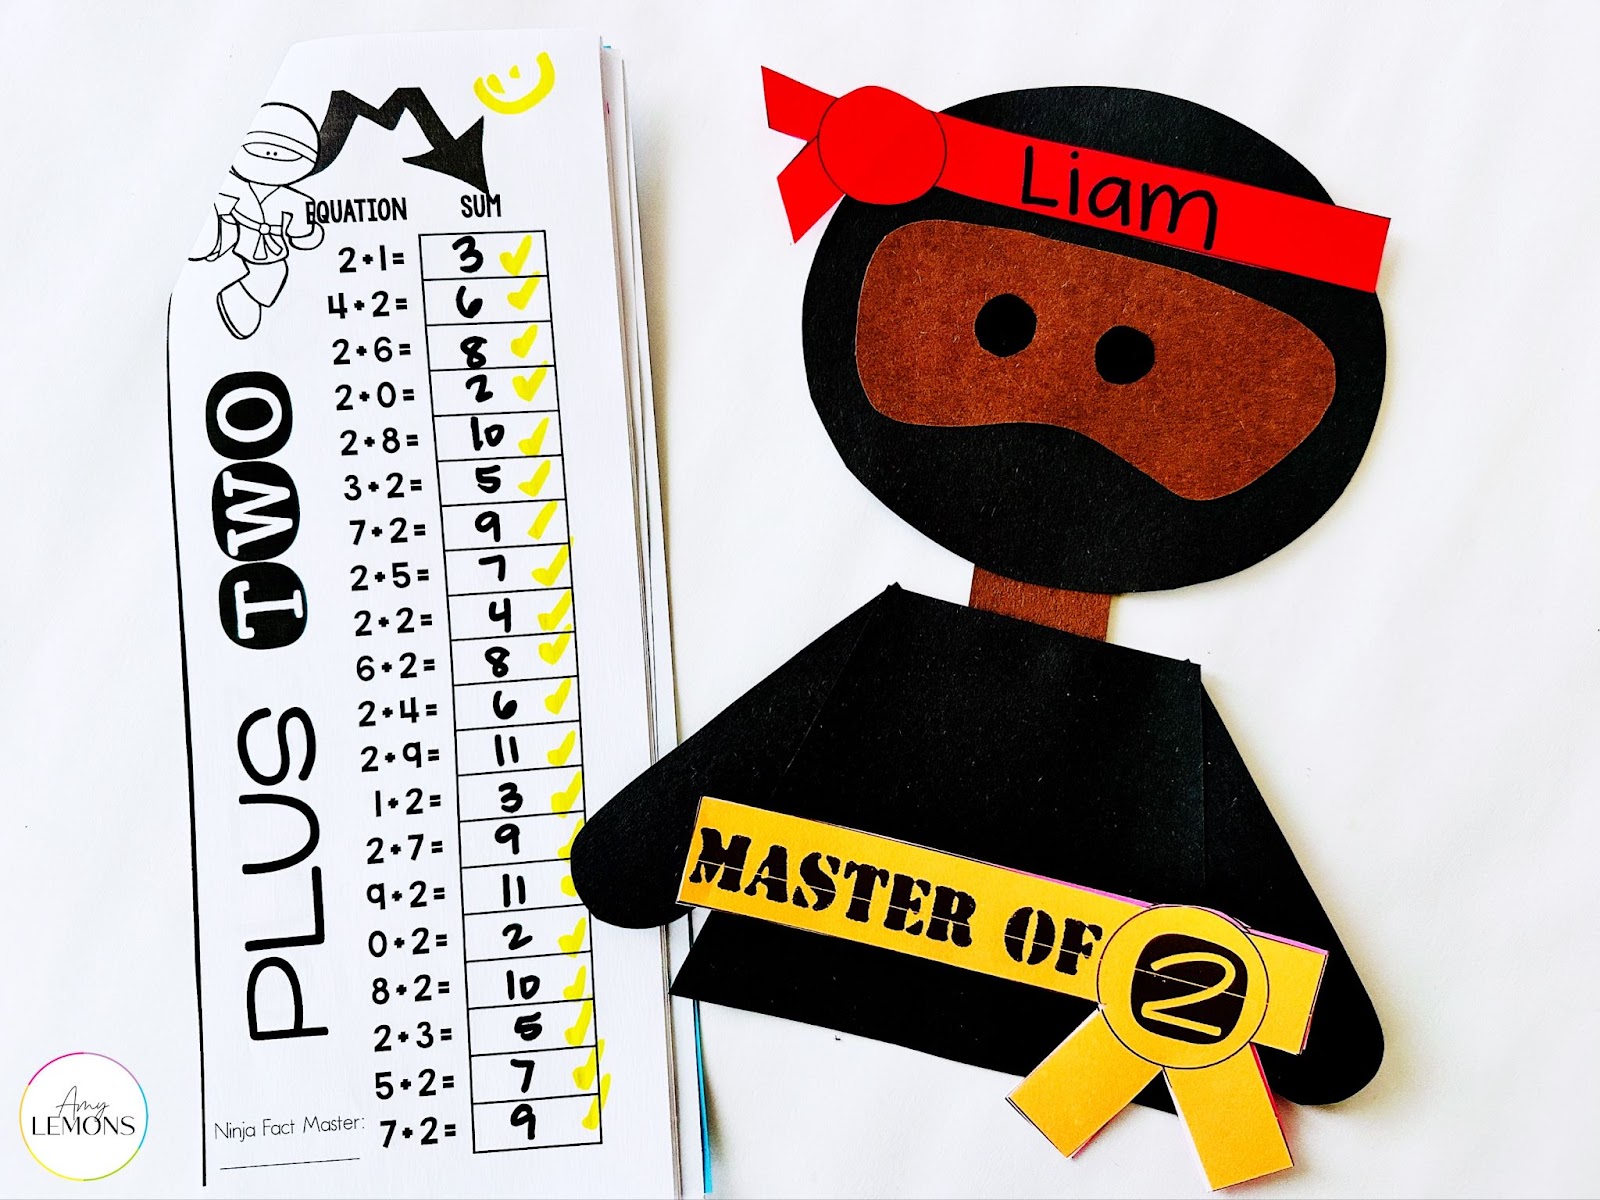 Ninja craft with belt to represent each level of math facts students master.